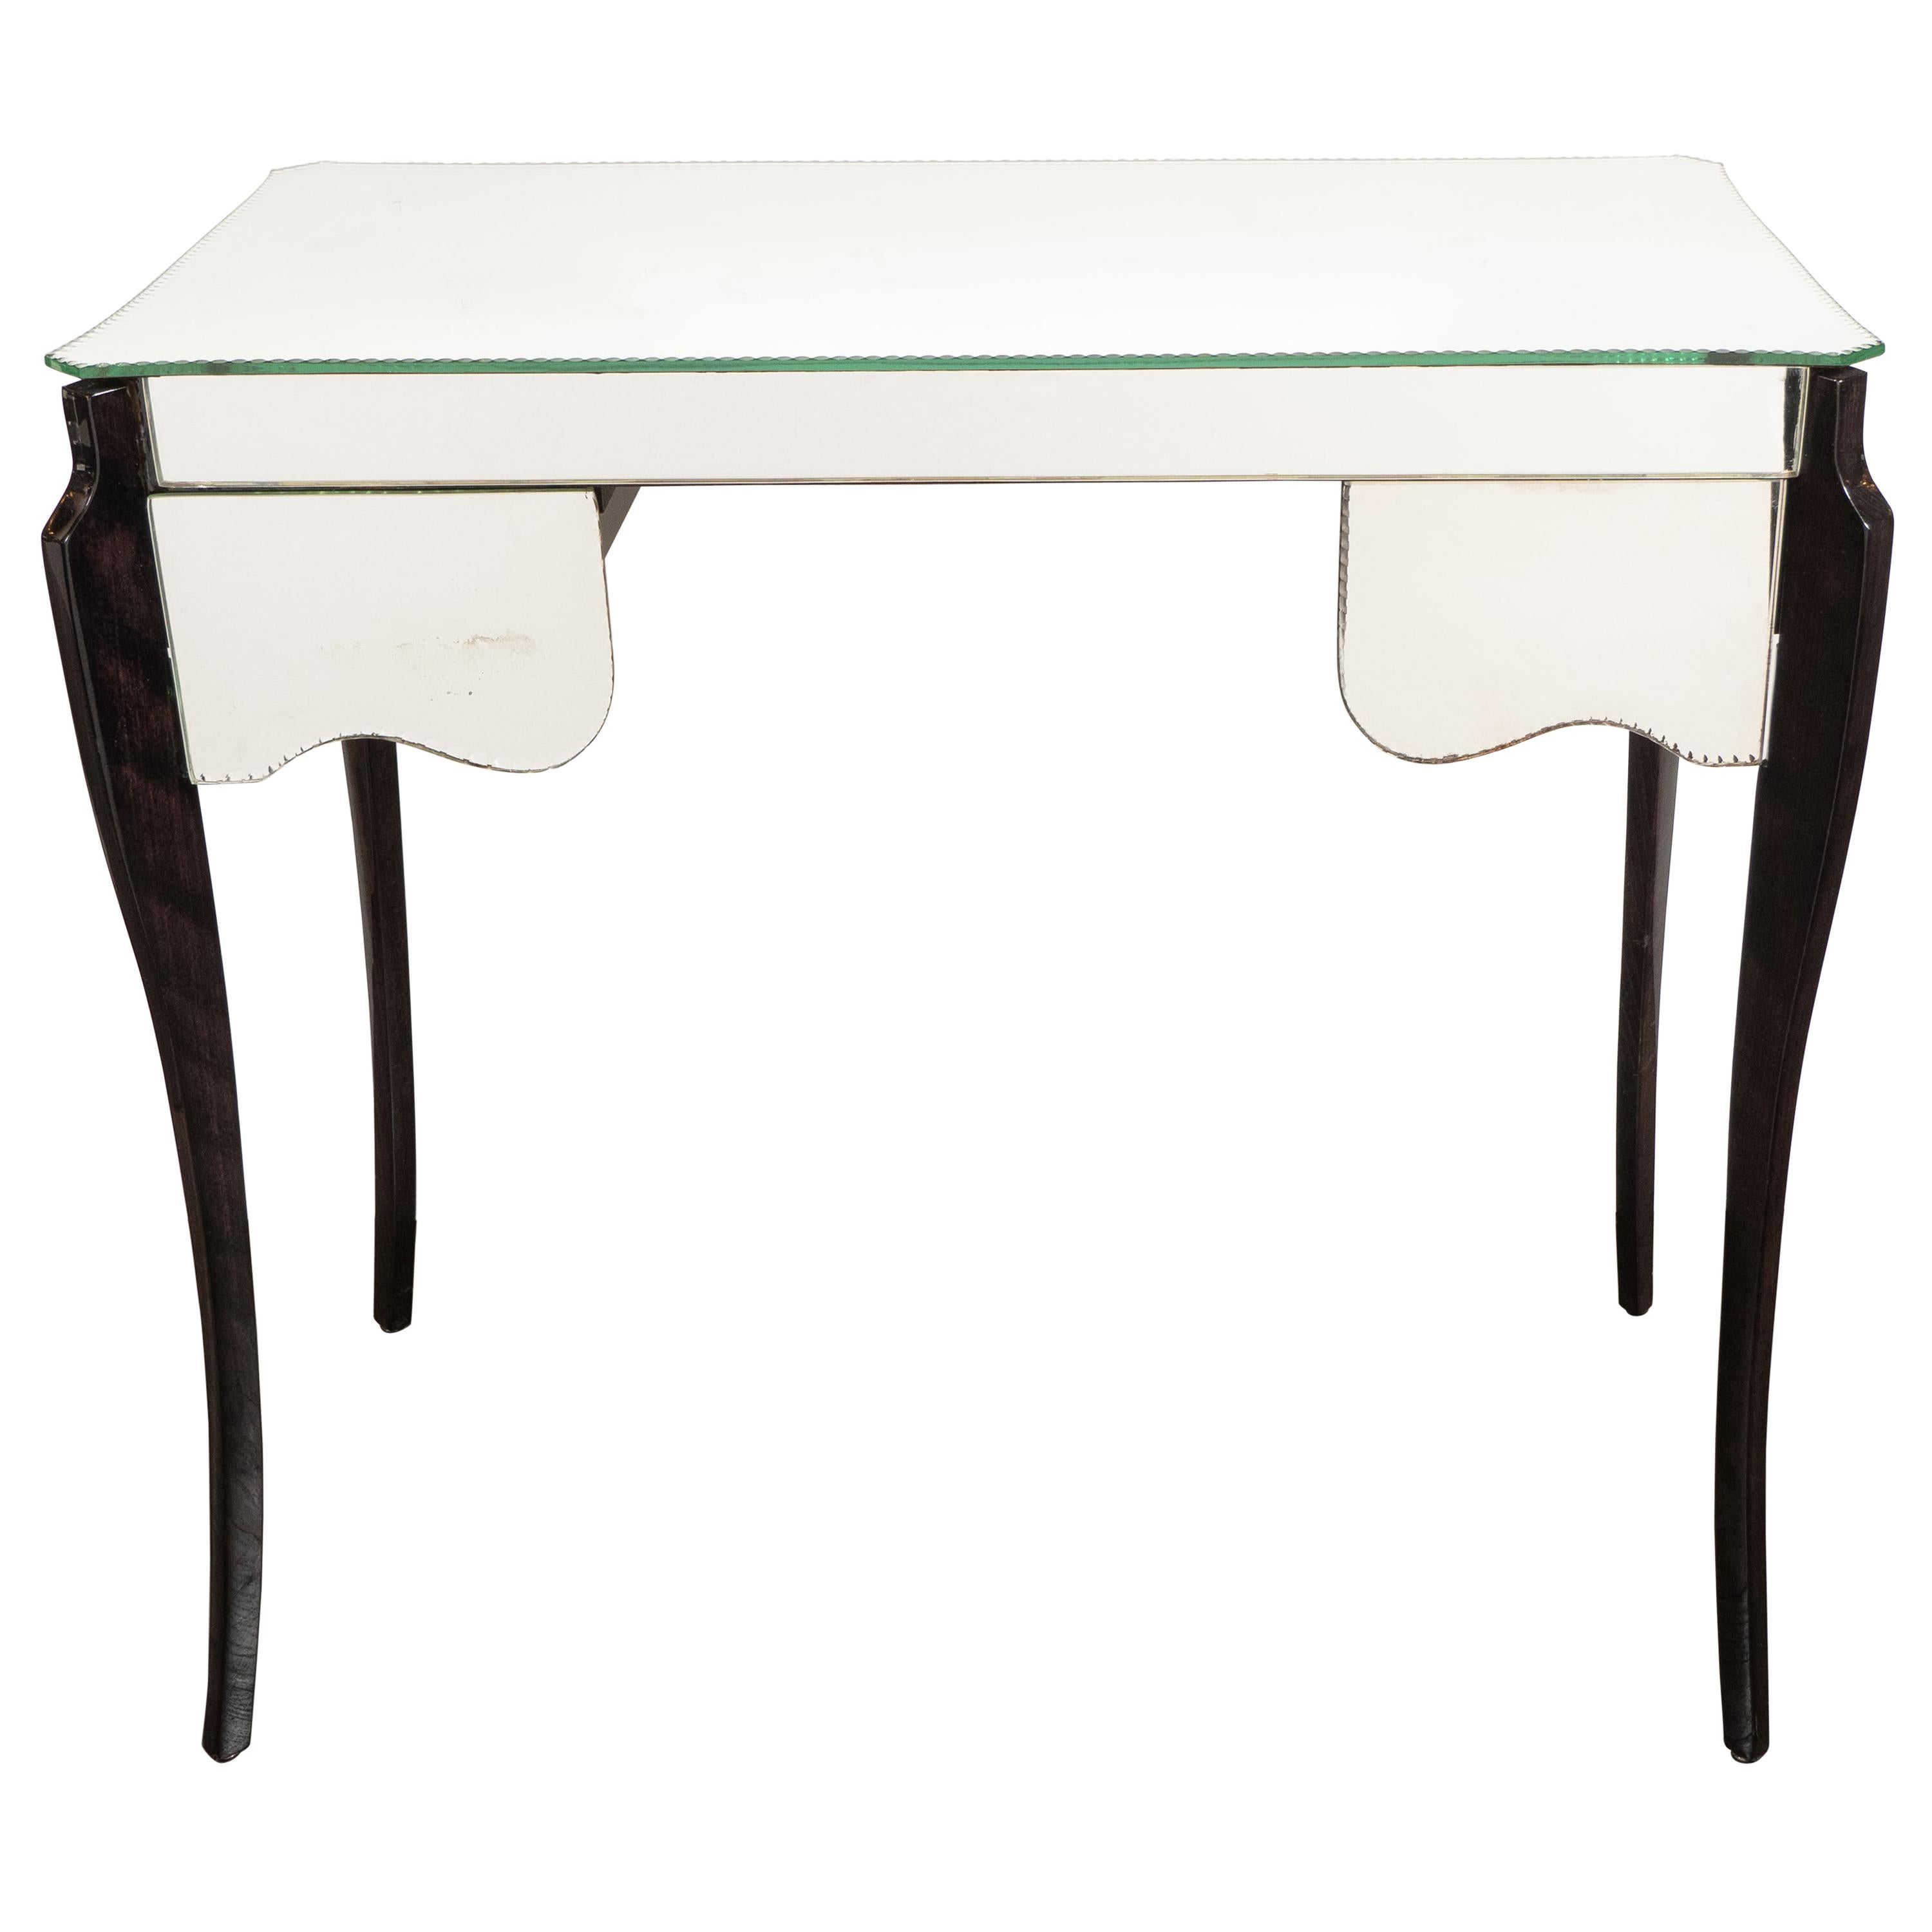 French Directoire Style Mirrored Vanity Table W/ Ebonized Walnut Cabriolet Legs